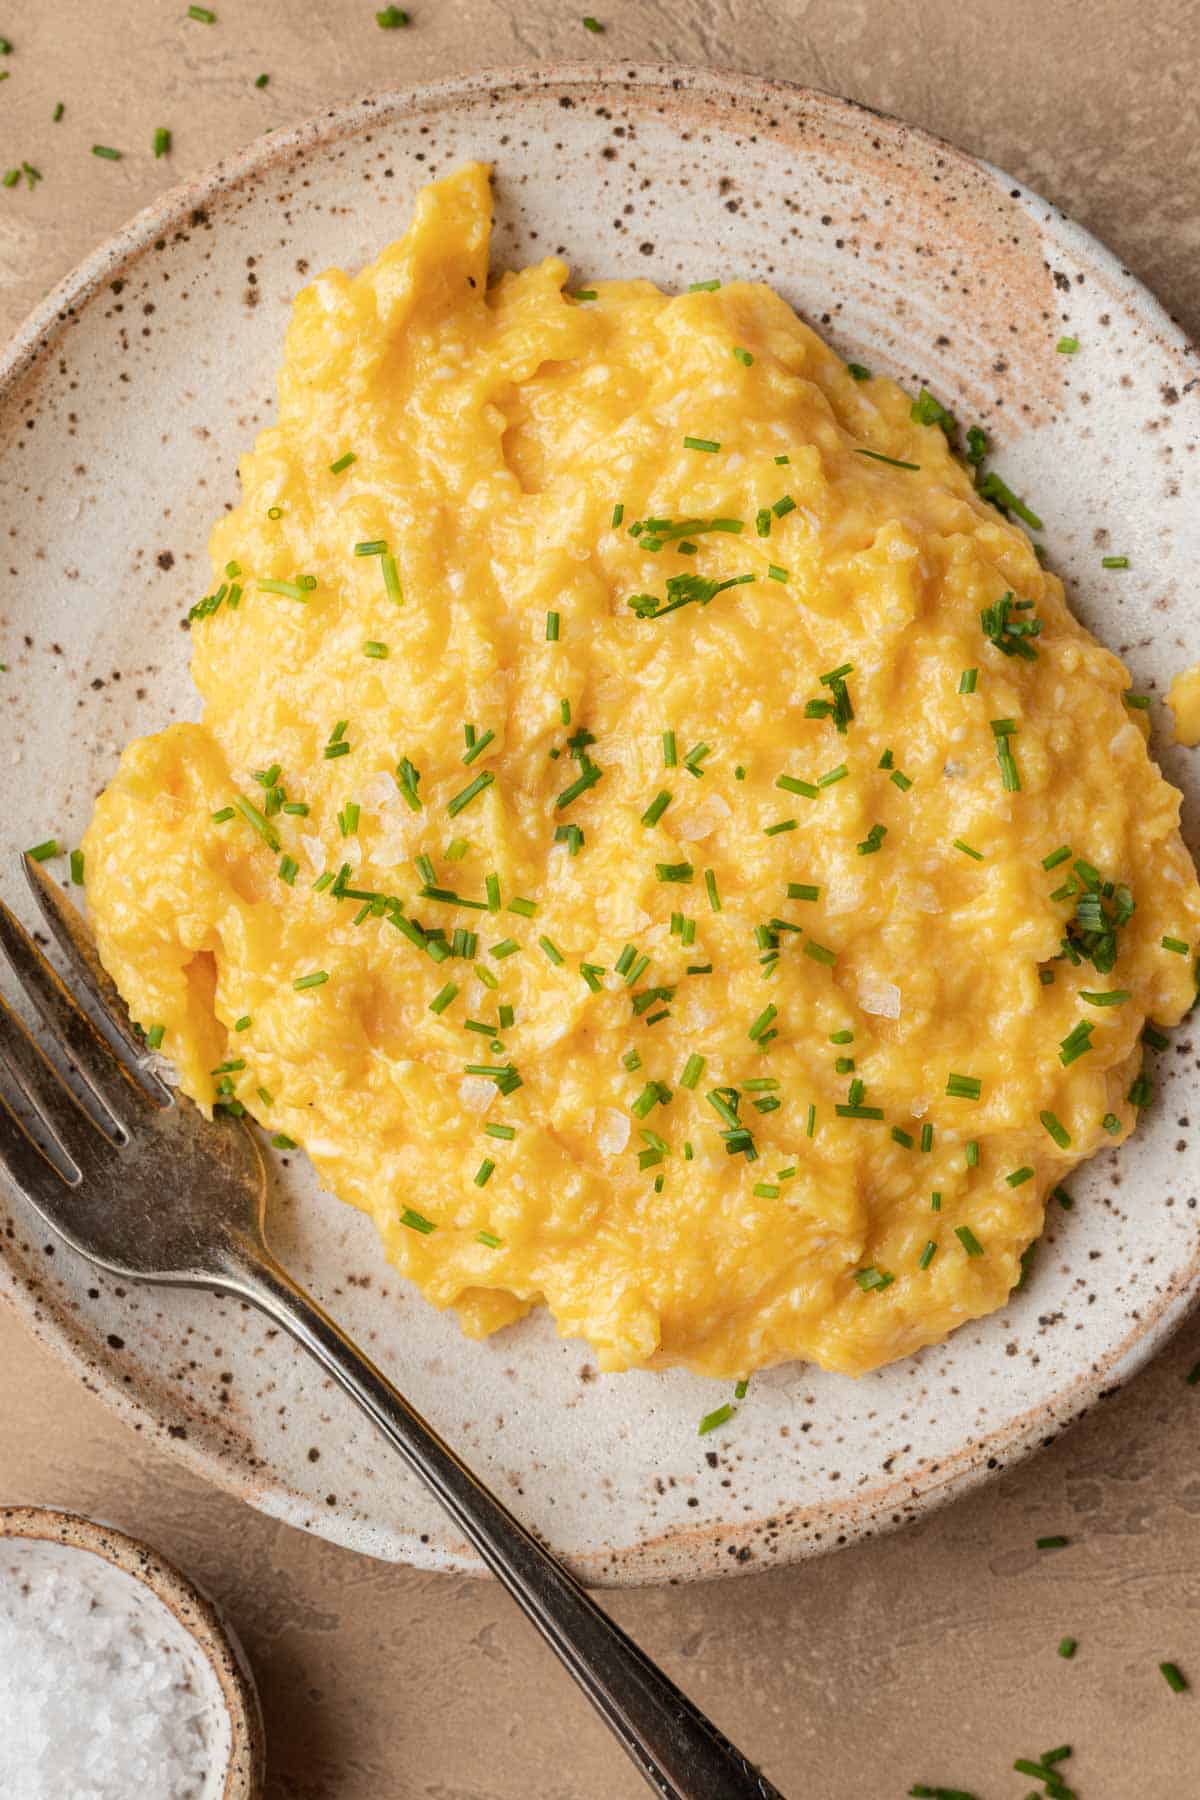 Freshly plated cheesy scrambled eggs that have fresh chives sprinkled on top!